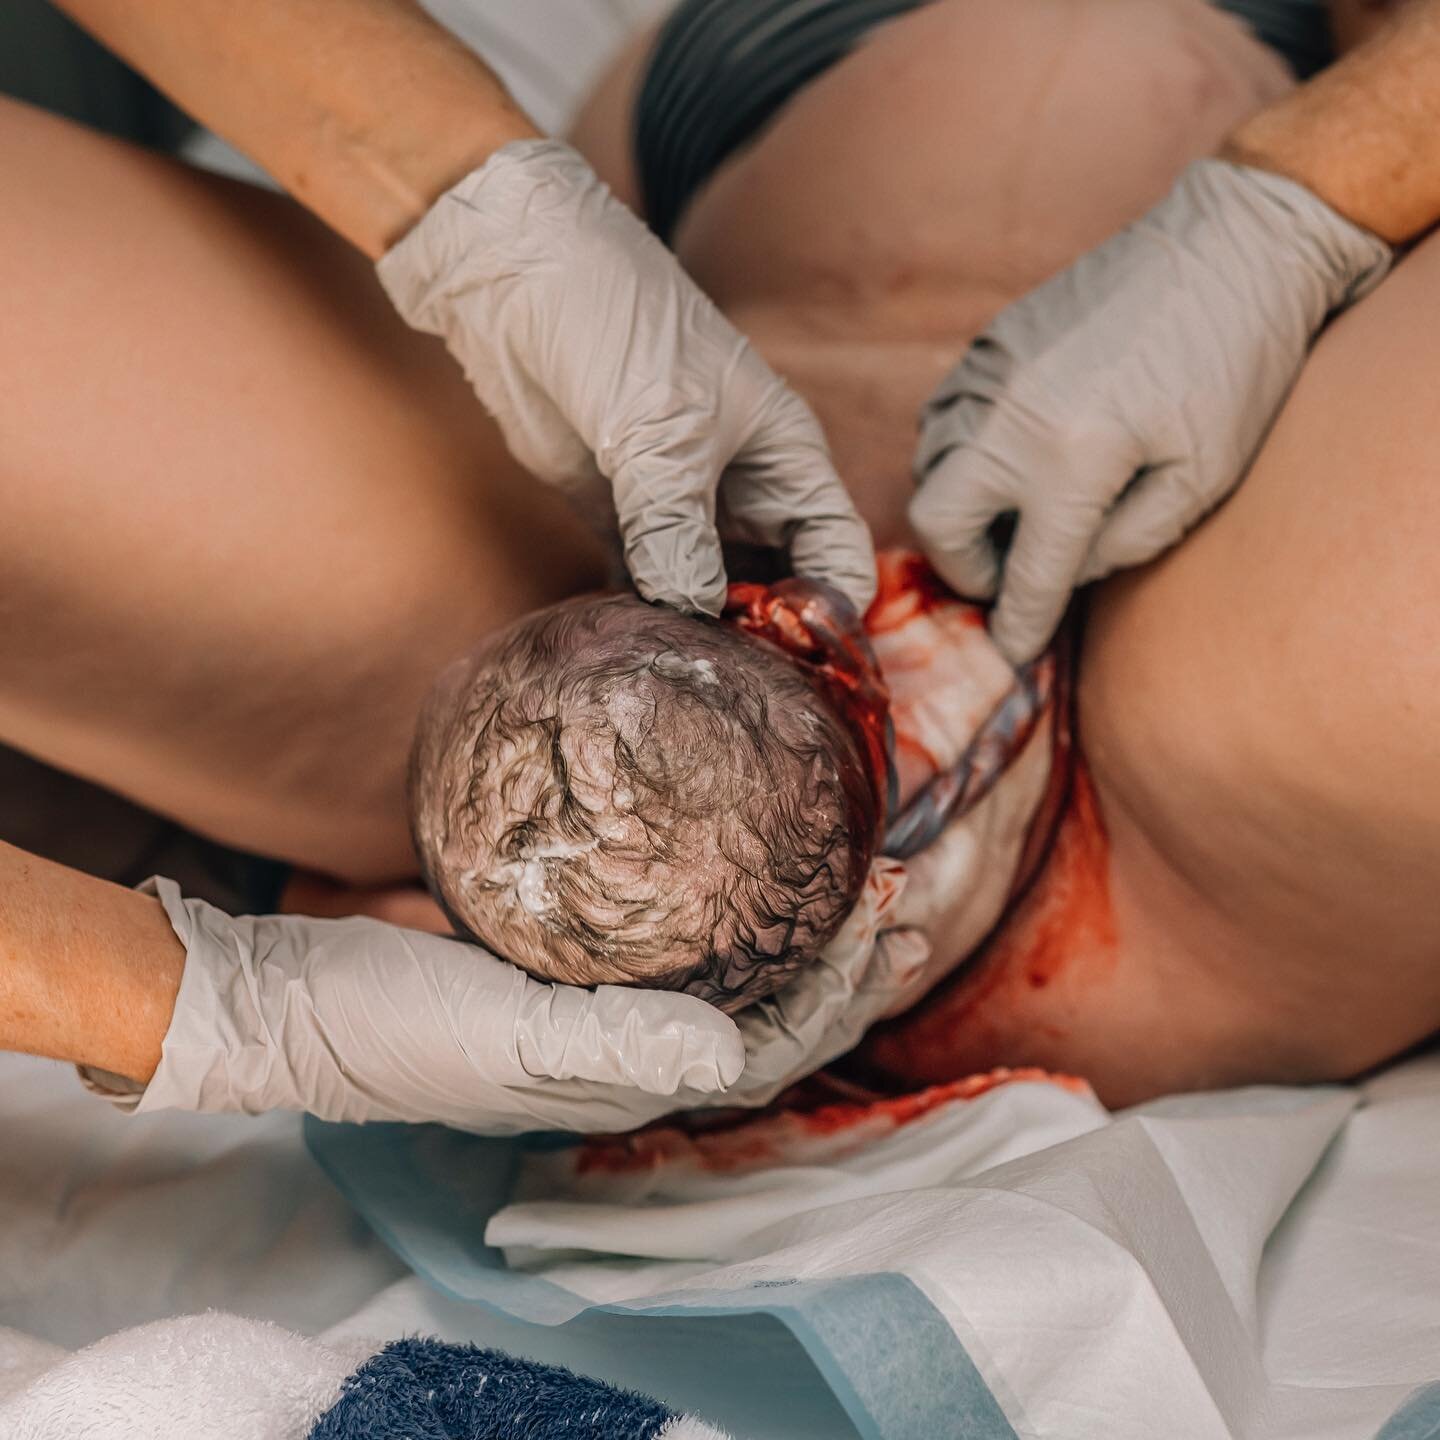 Did you know that around 1 in 3 babies are born with a nuchal cord? 

It's very common for babies to have their cord around their neck, and it's rarely problematic. A few quick maneuvers by the midwife and it's usually resolved within seconds 🥰💕
.
